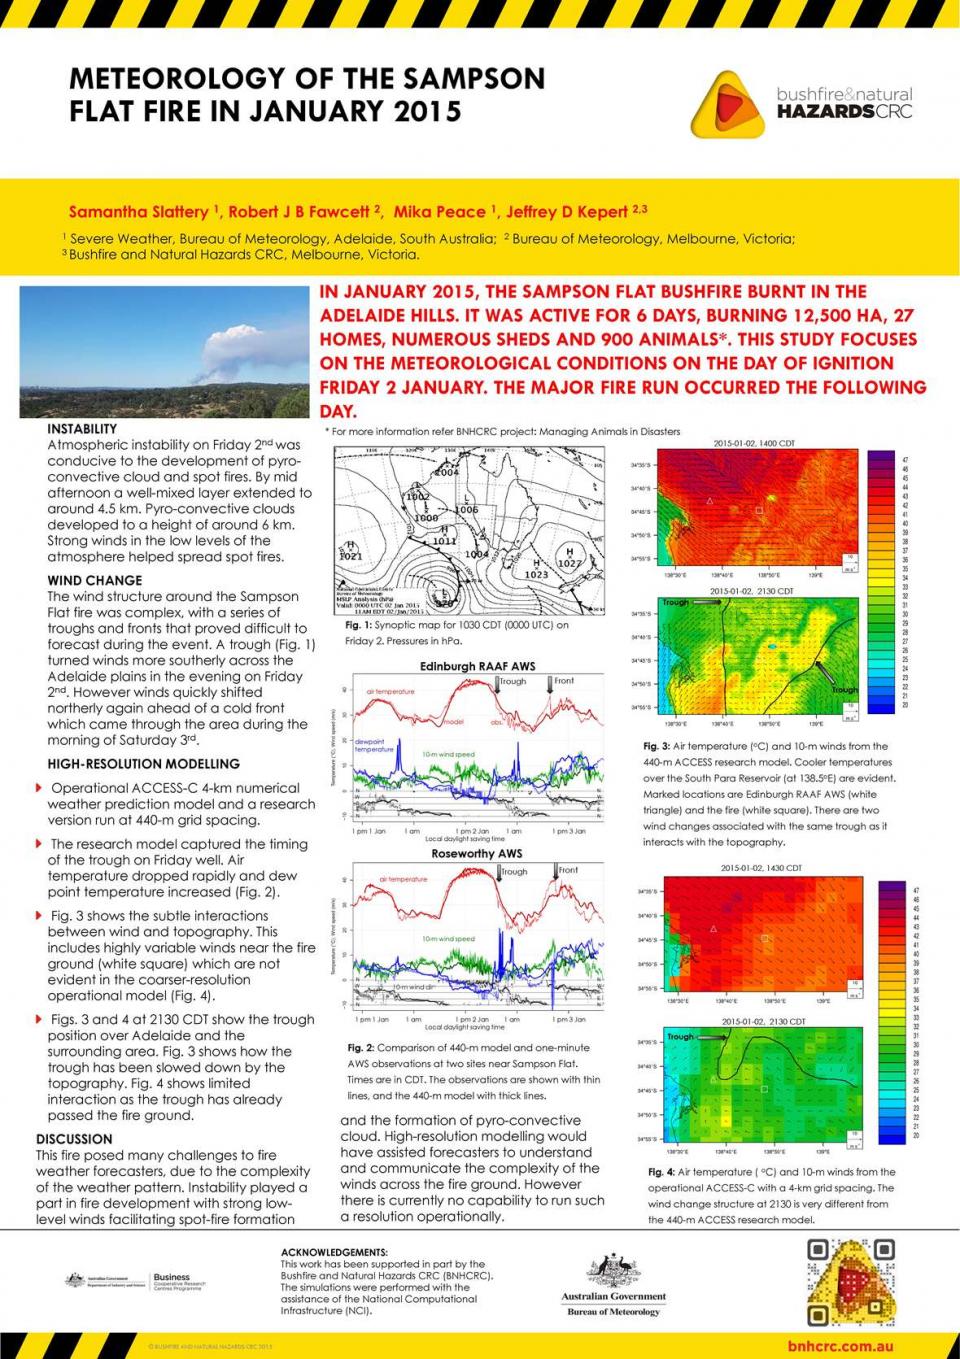 Meteorology of the Sampson Flat Fire in January 2015